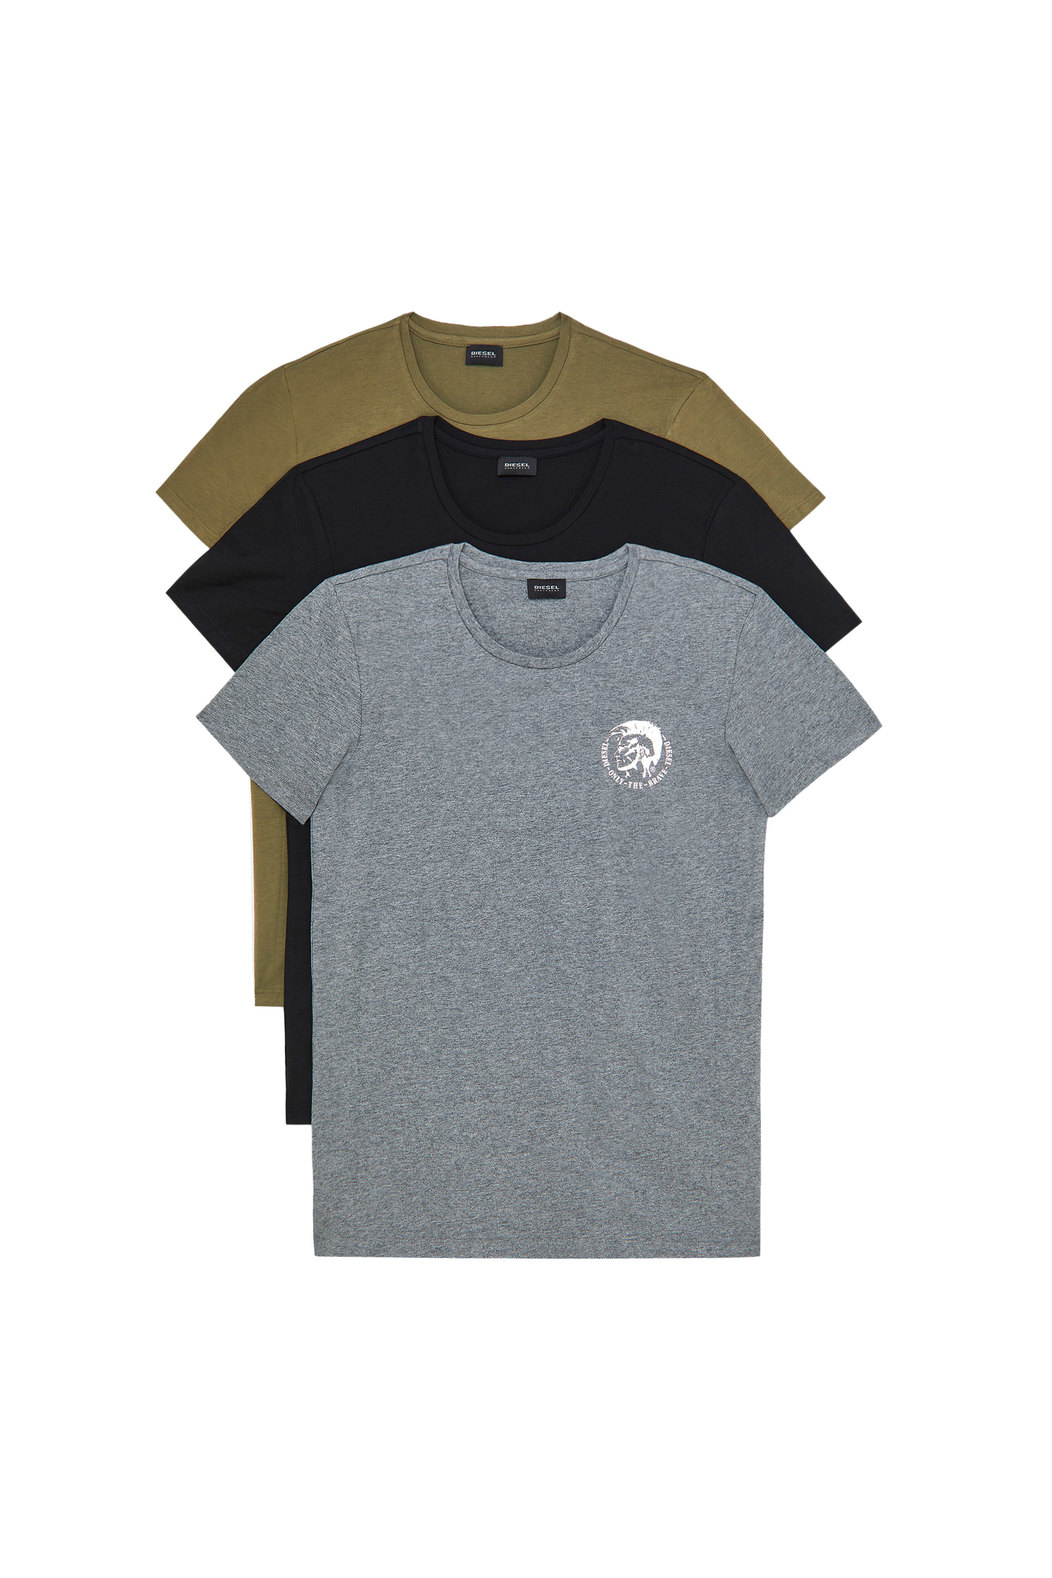 T-Shirt With Mohawk Logo - 3 Pack